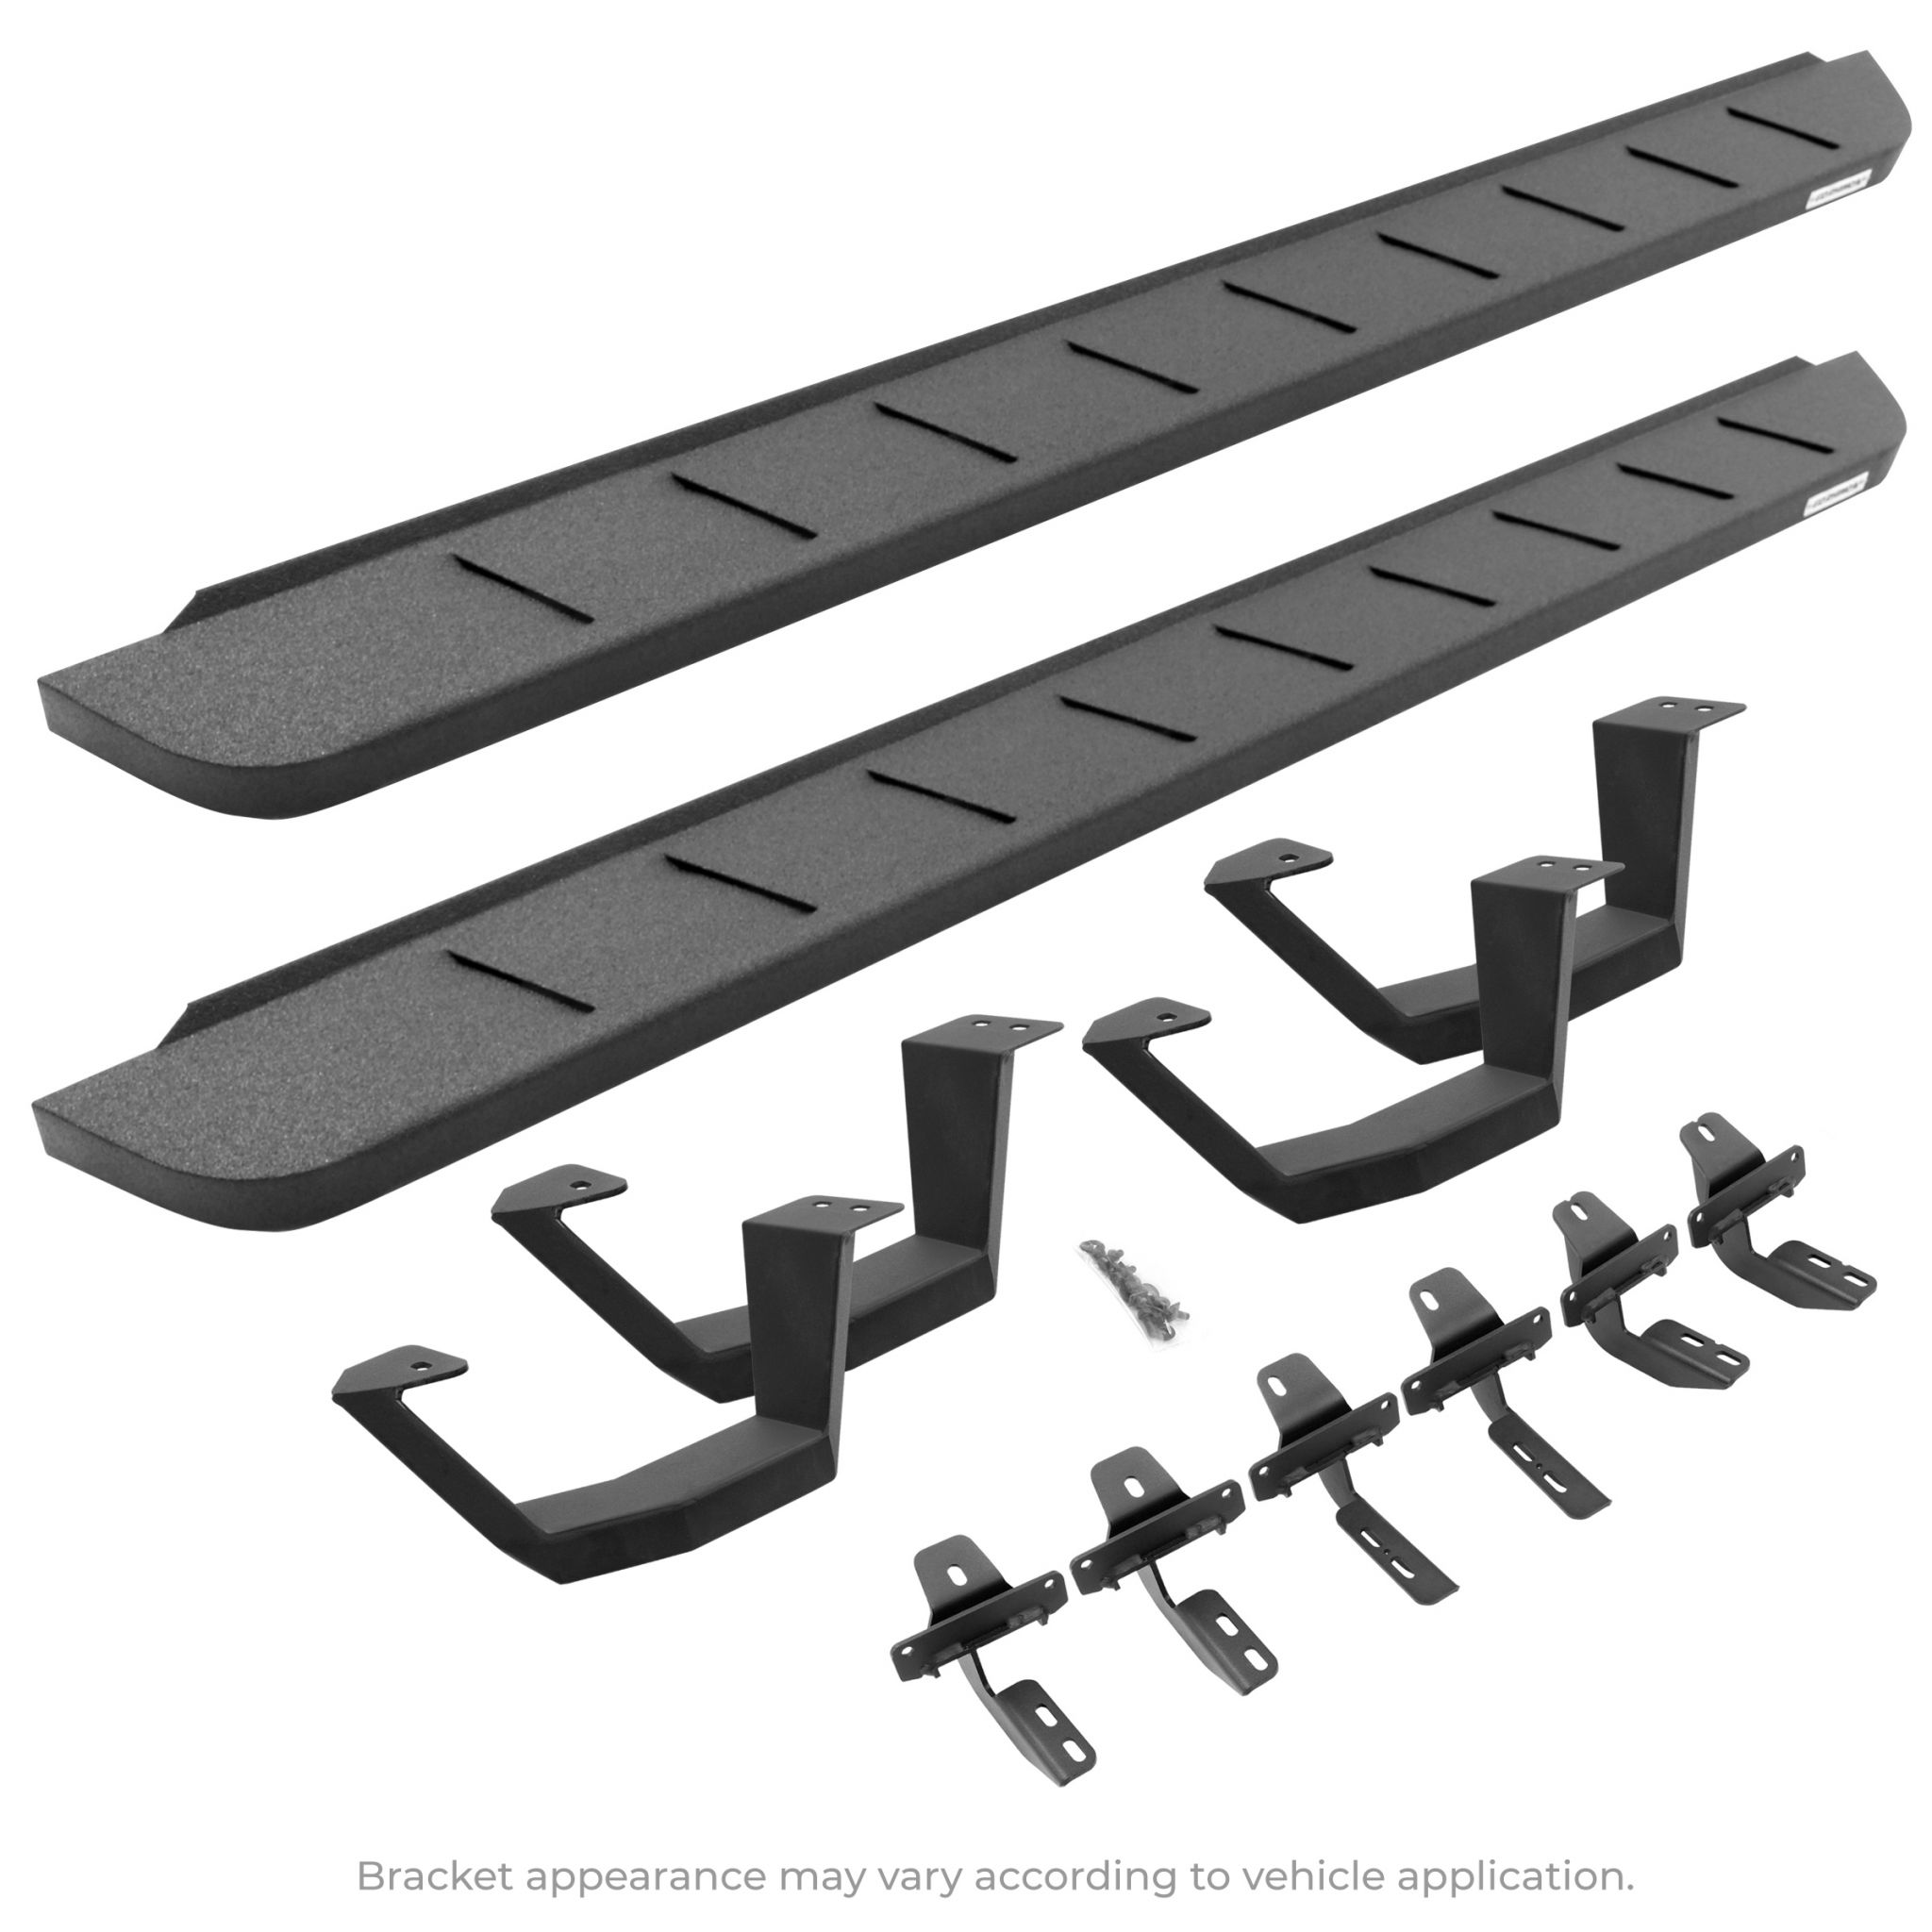 Go Rhino - 6345168720T - RB10 Running Boards With Mounting Brackets & 2 Pairs of Drop Steps Kit - Protective Bedliner Coating